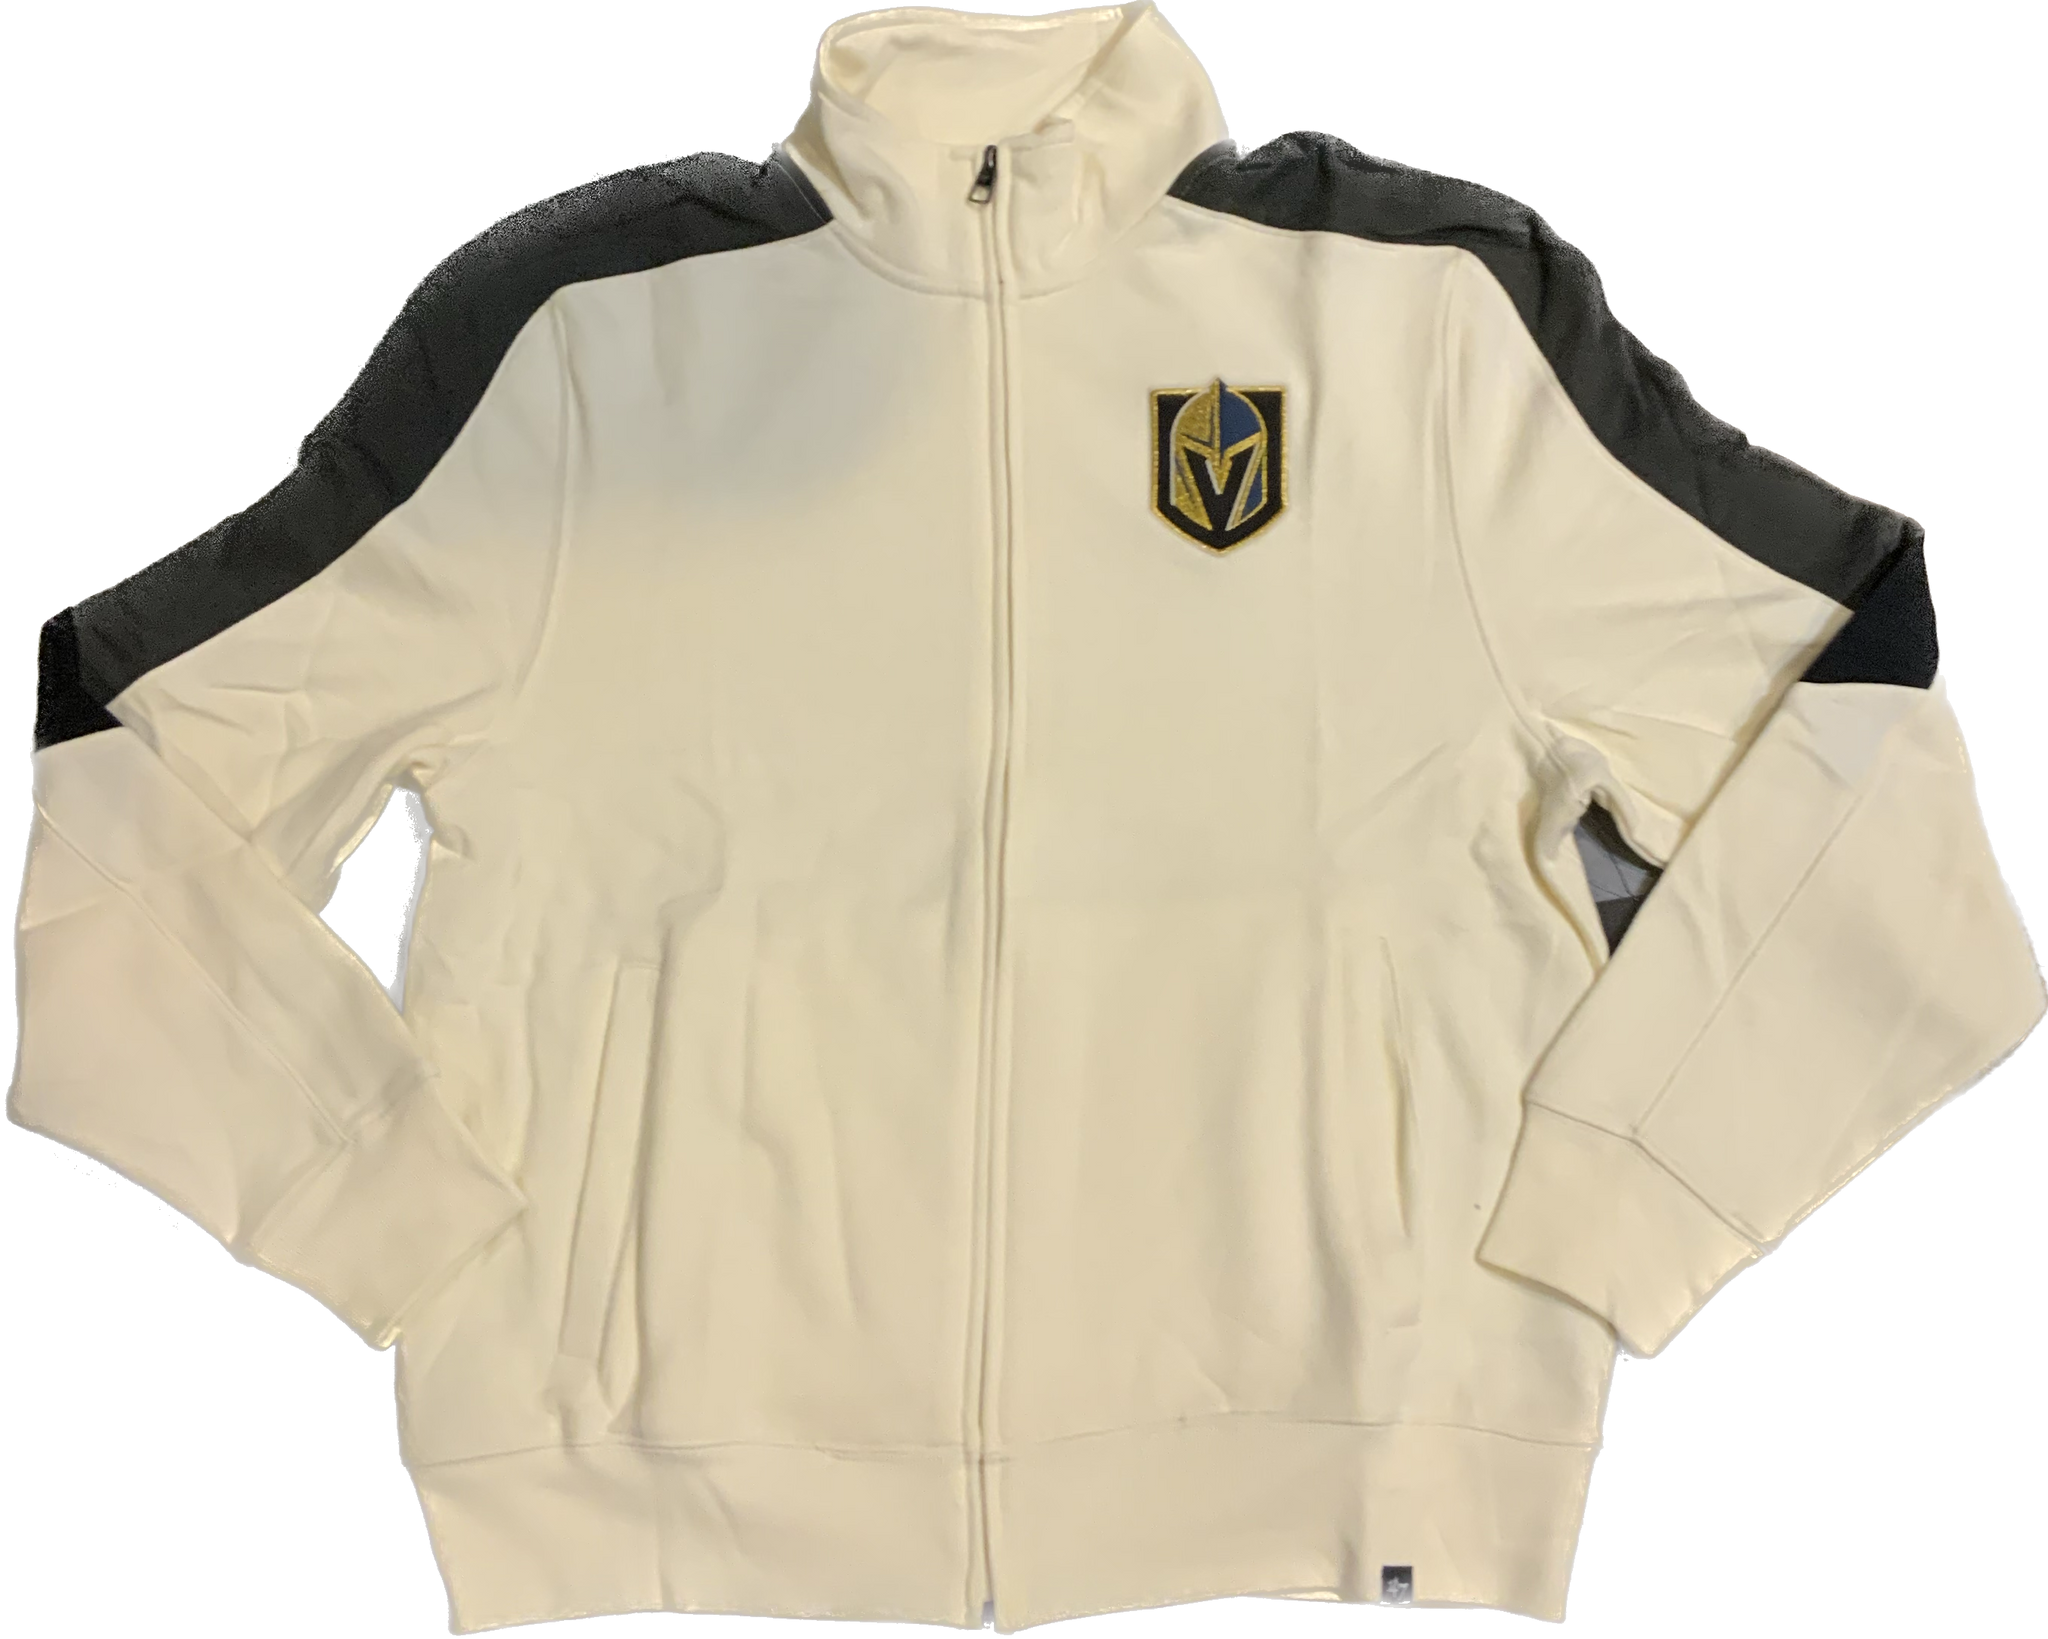 Vegas Golden Knights Shoot Out Track Jacket - Cream